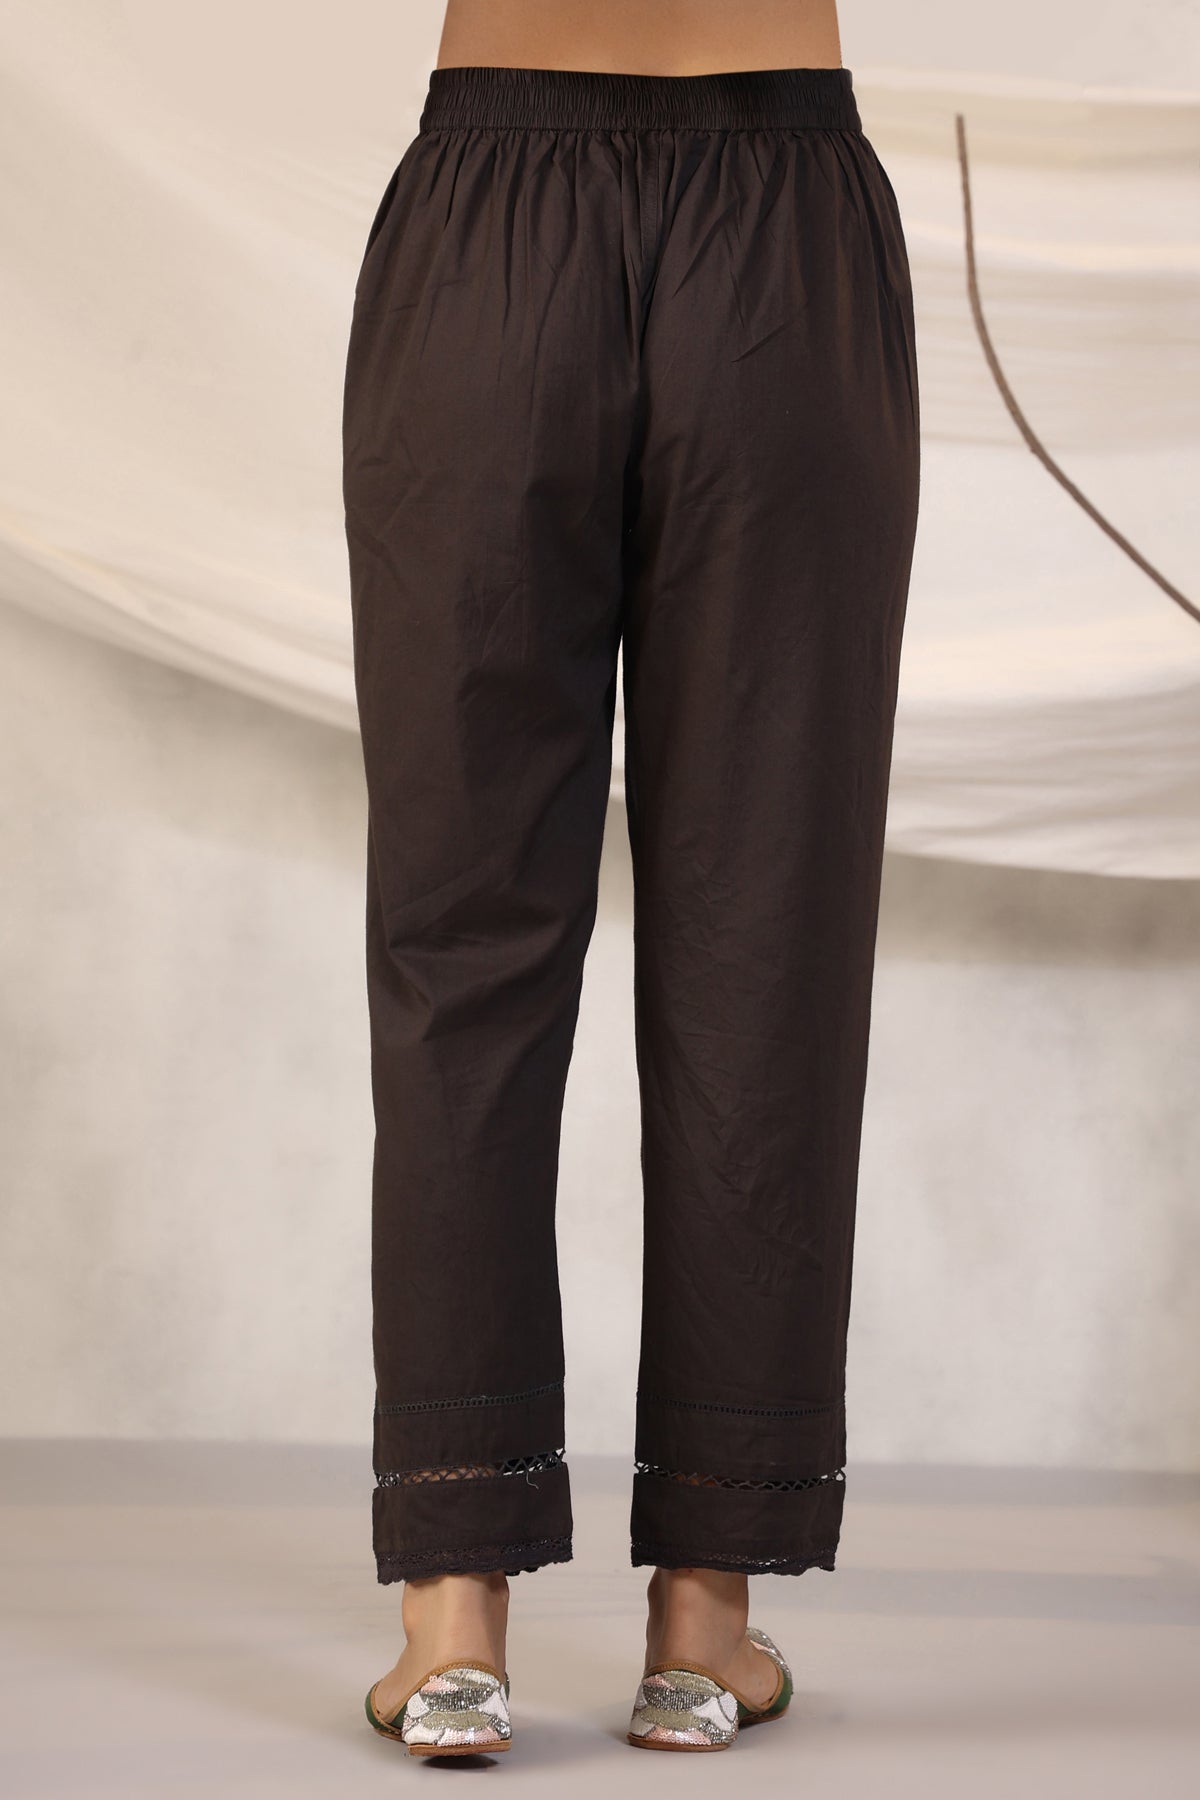 Firdous Sehra Black Relaxed Fit Cotton Pants - shahenazindia